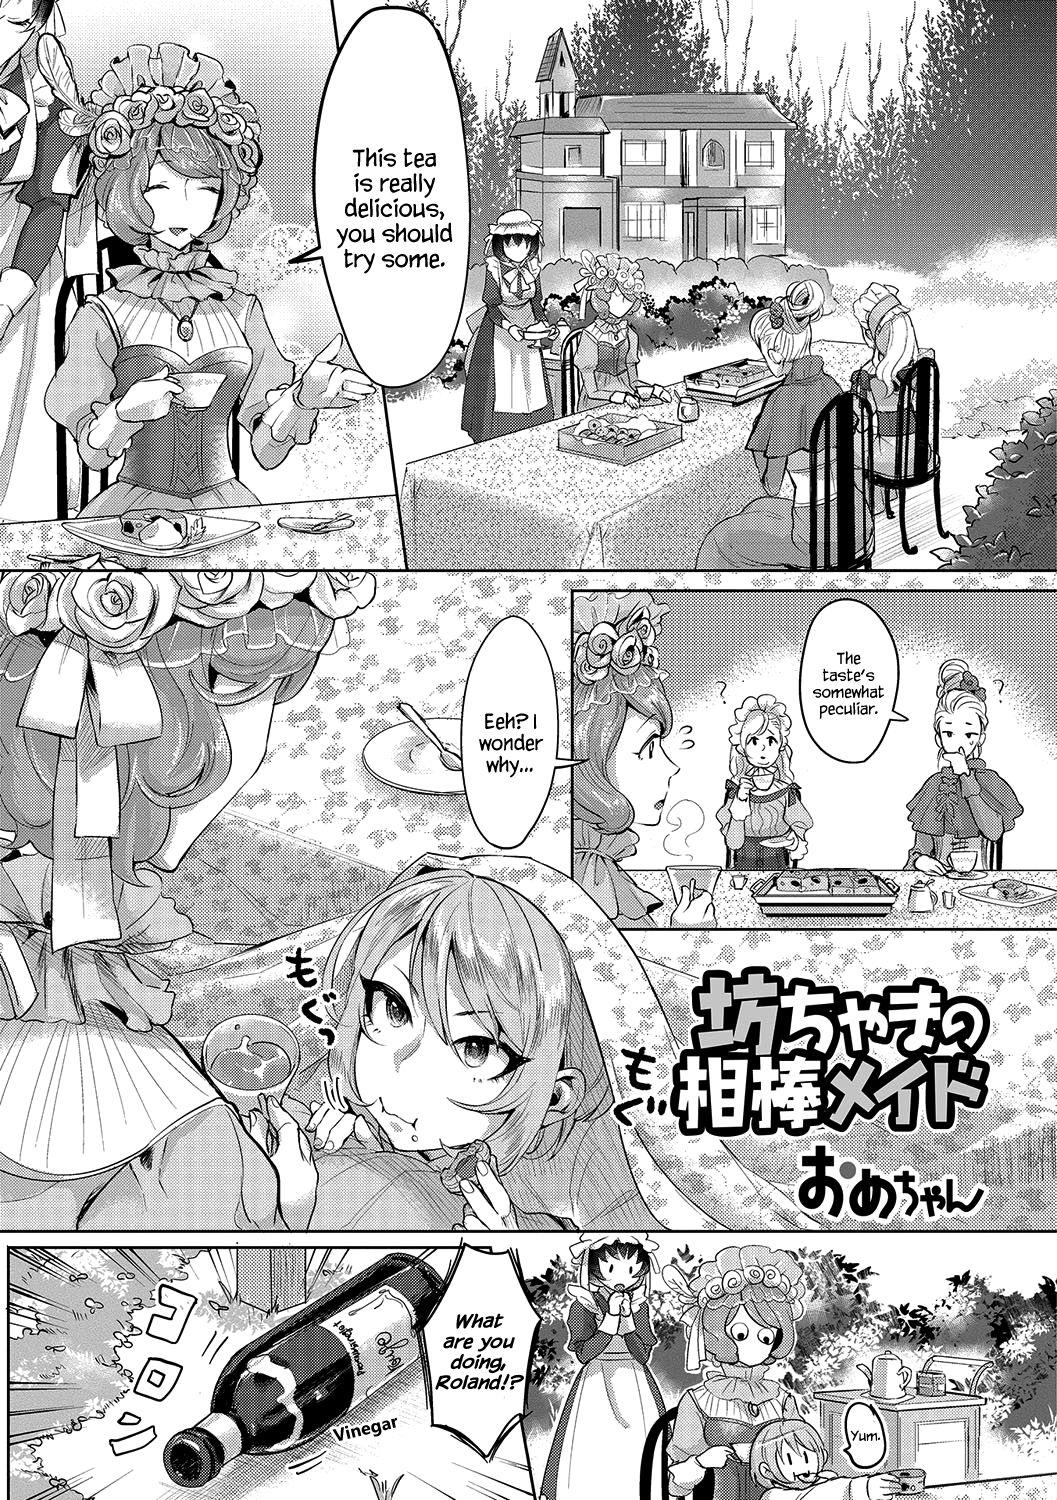 Bocchama no Aibou Maid | The Young Master’s Partner Maid 1